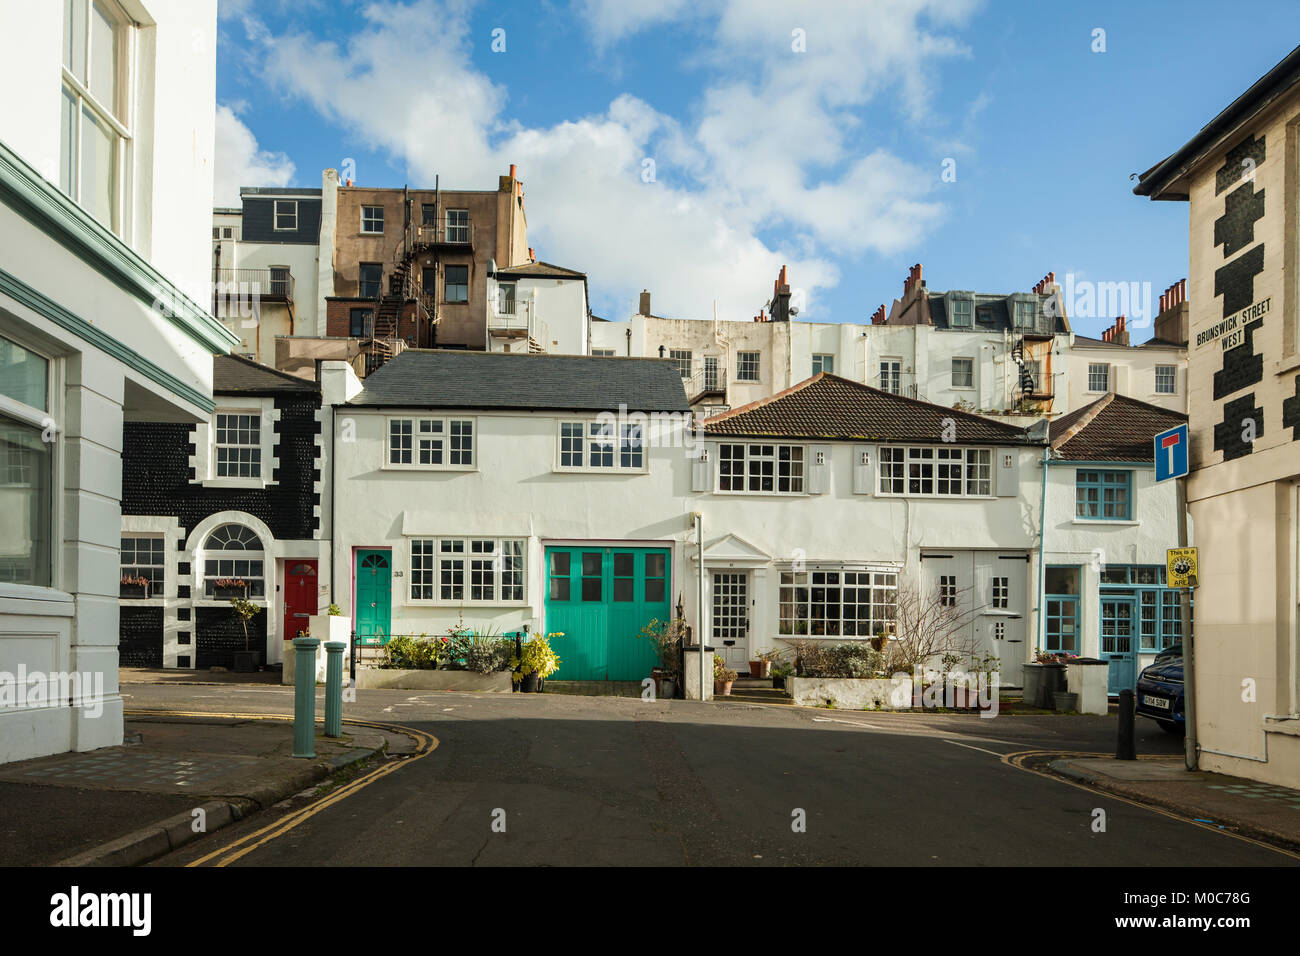 Backstreet in Hove, East Sussex, England. Stock Photo